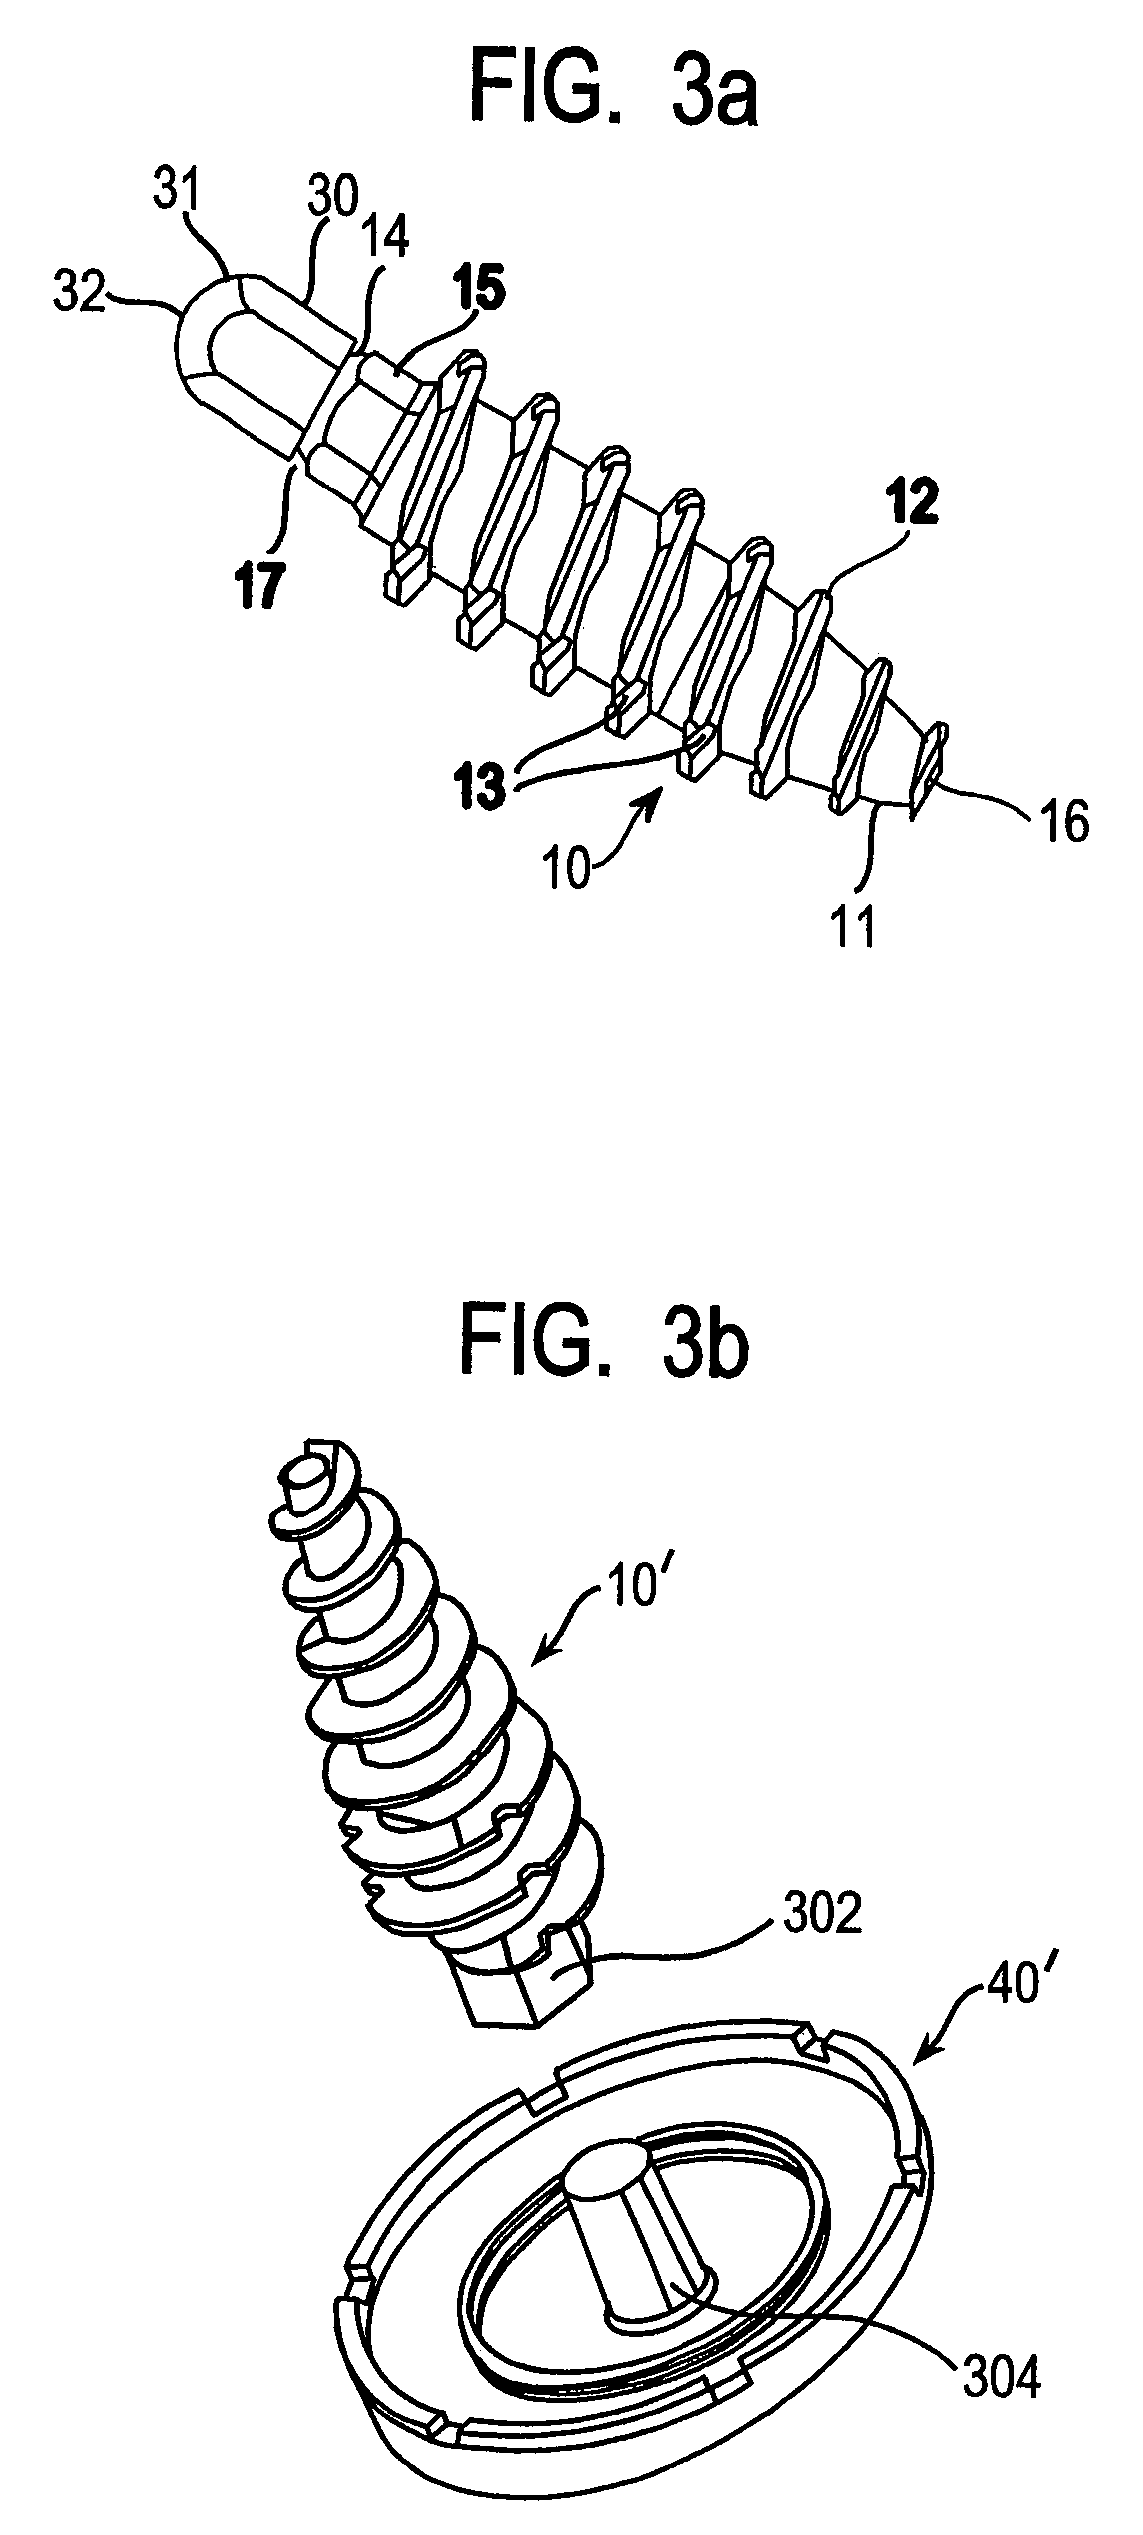 System and method for joint resurface repair